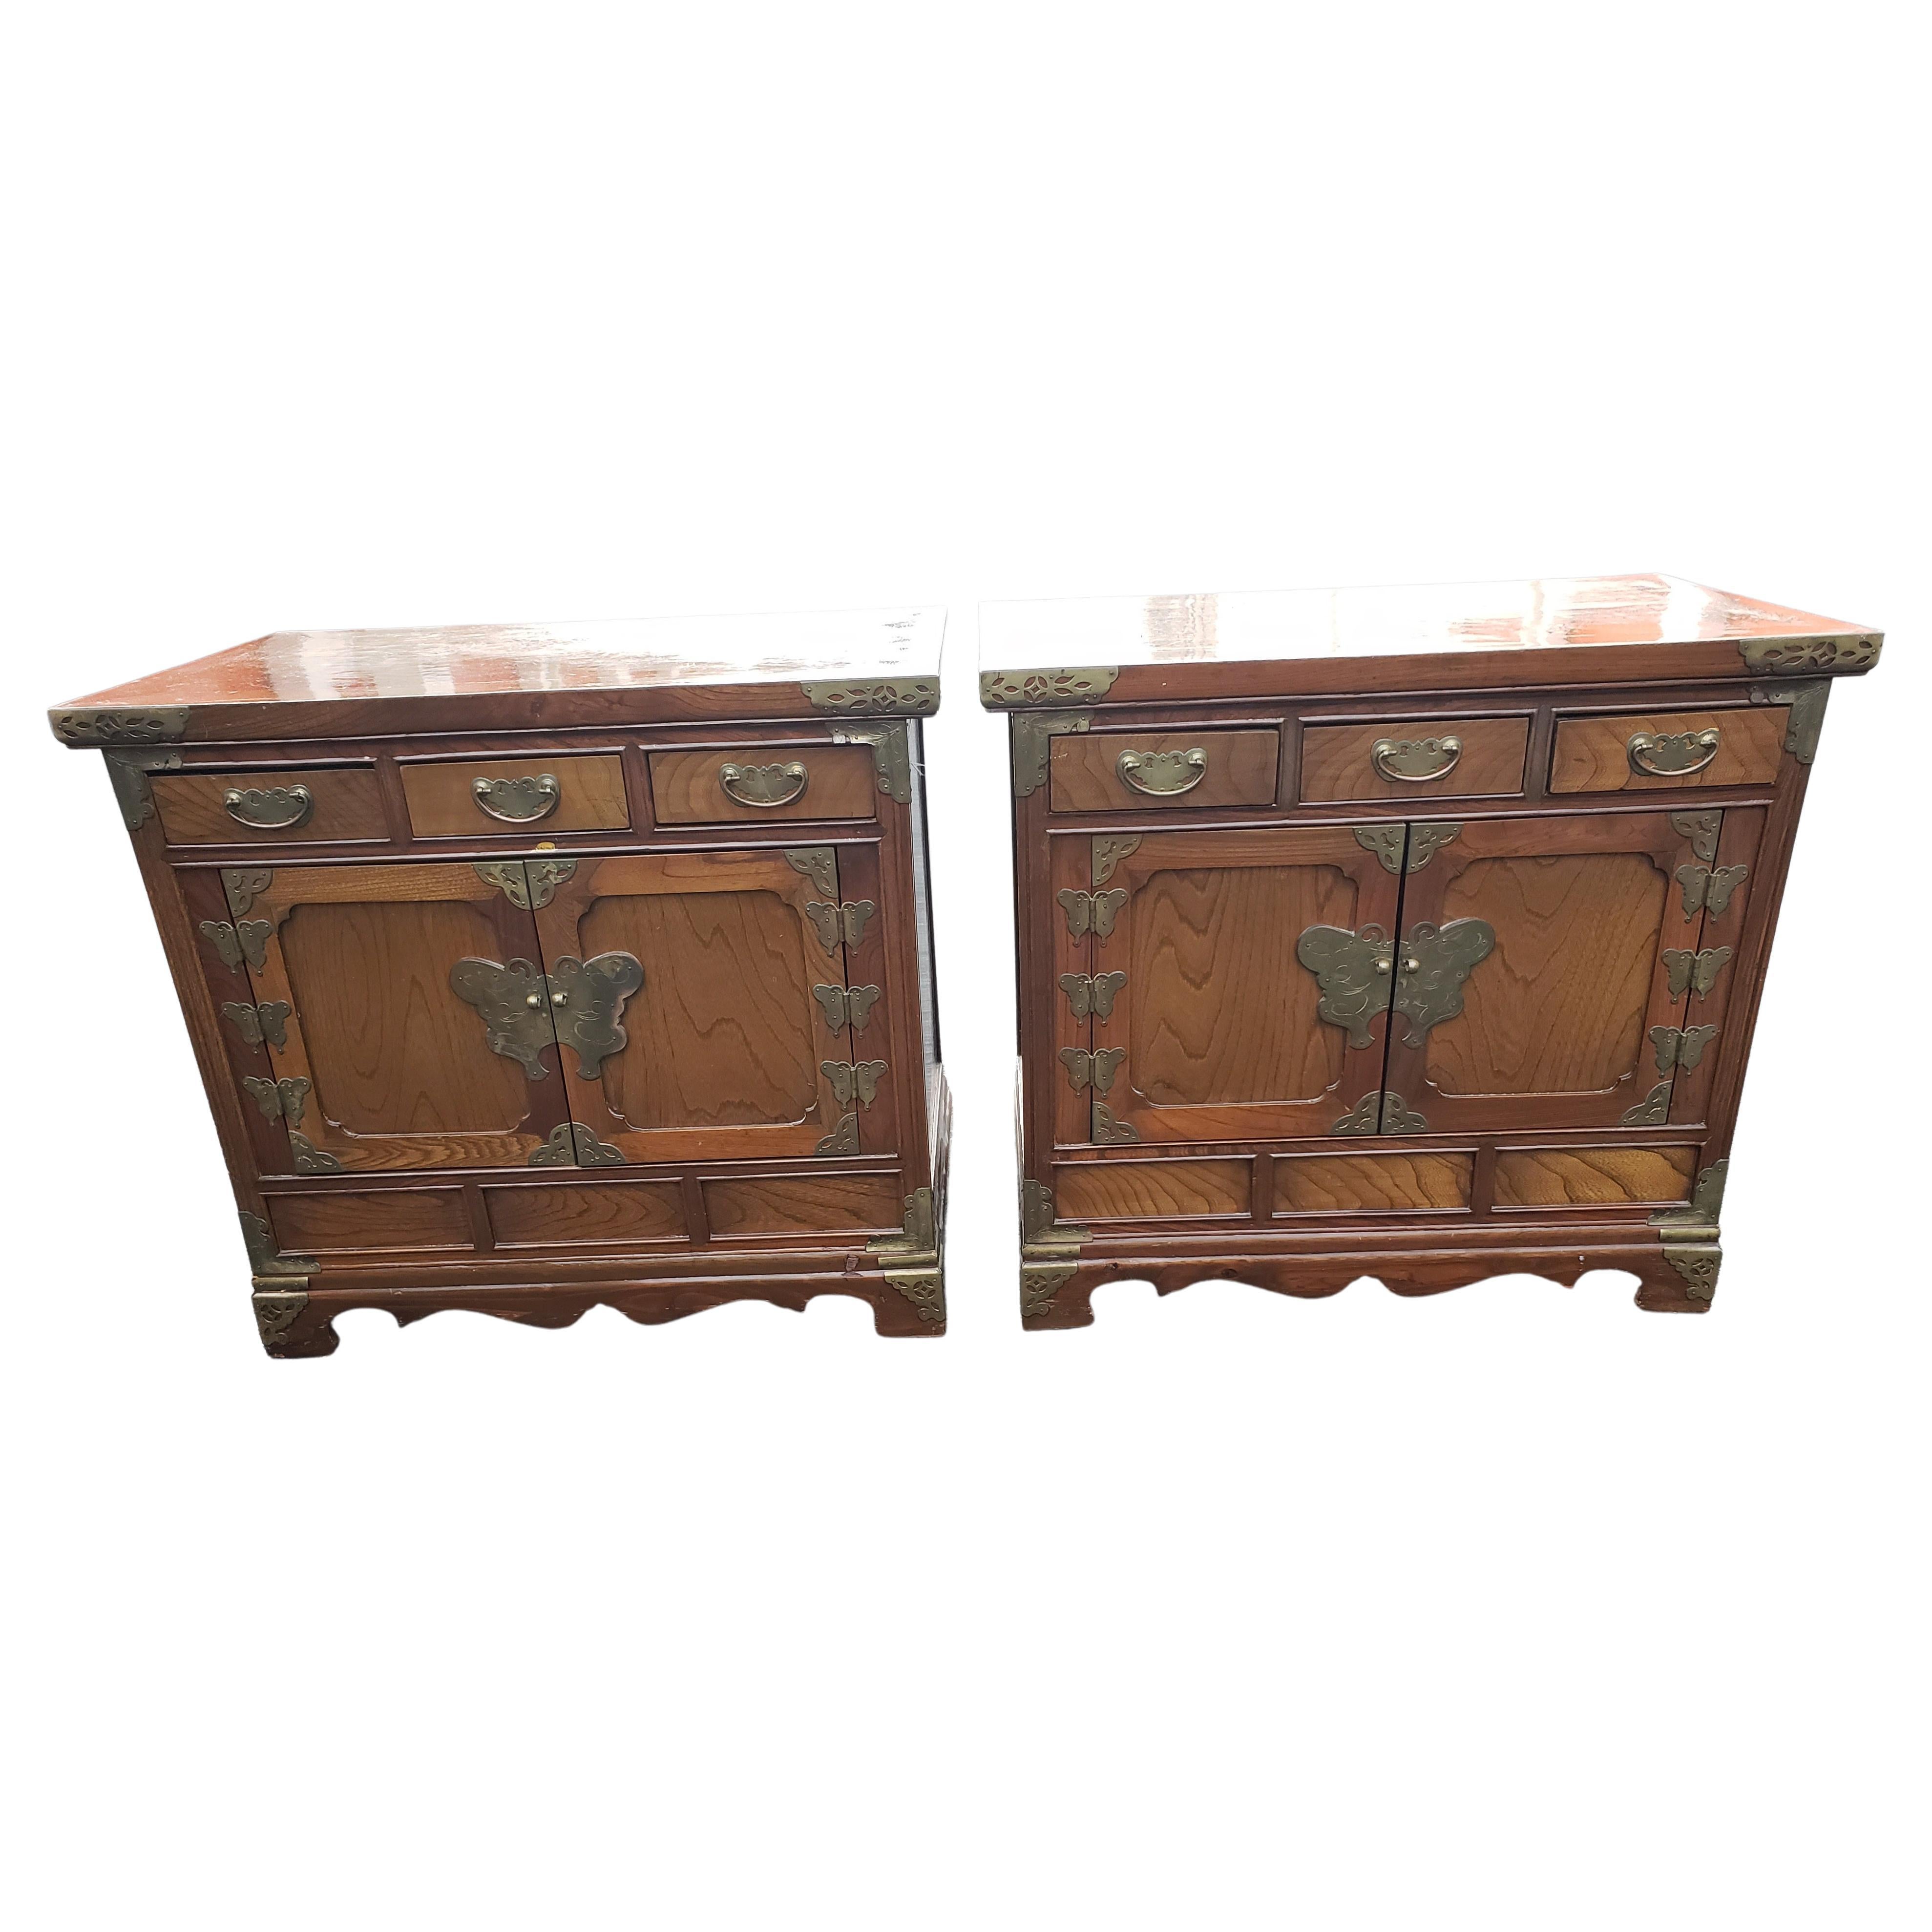 1932 Asian Tansu style Campaign nightstands. Made of Walnut Burl wood and decorated with Brass Fittings. These versatile pieces are great storage cabinets in the bedroom and well as side tables in the family or living room. They are very light